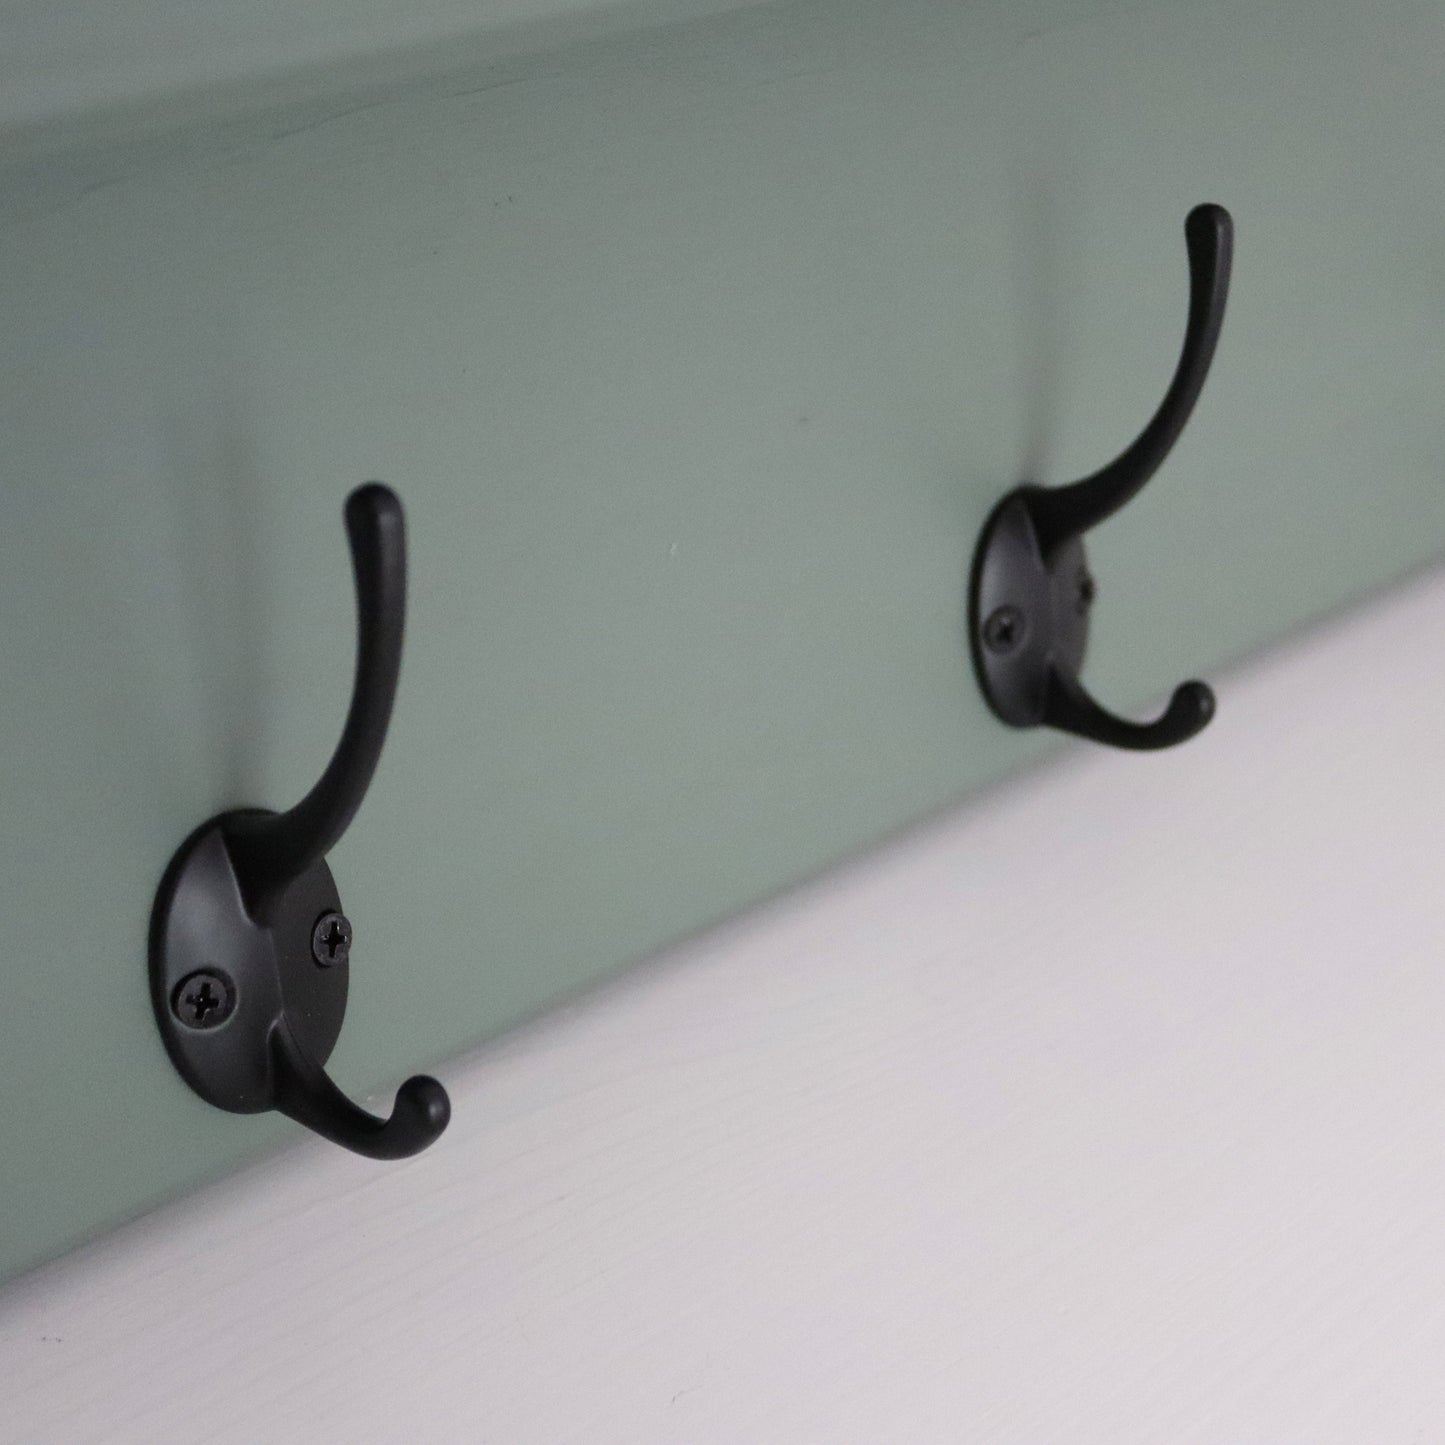 Coat Hook and Shoe Rack Storage Narrow 60 cm by 22 cm by 45 cm